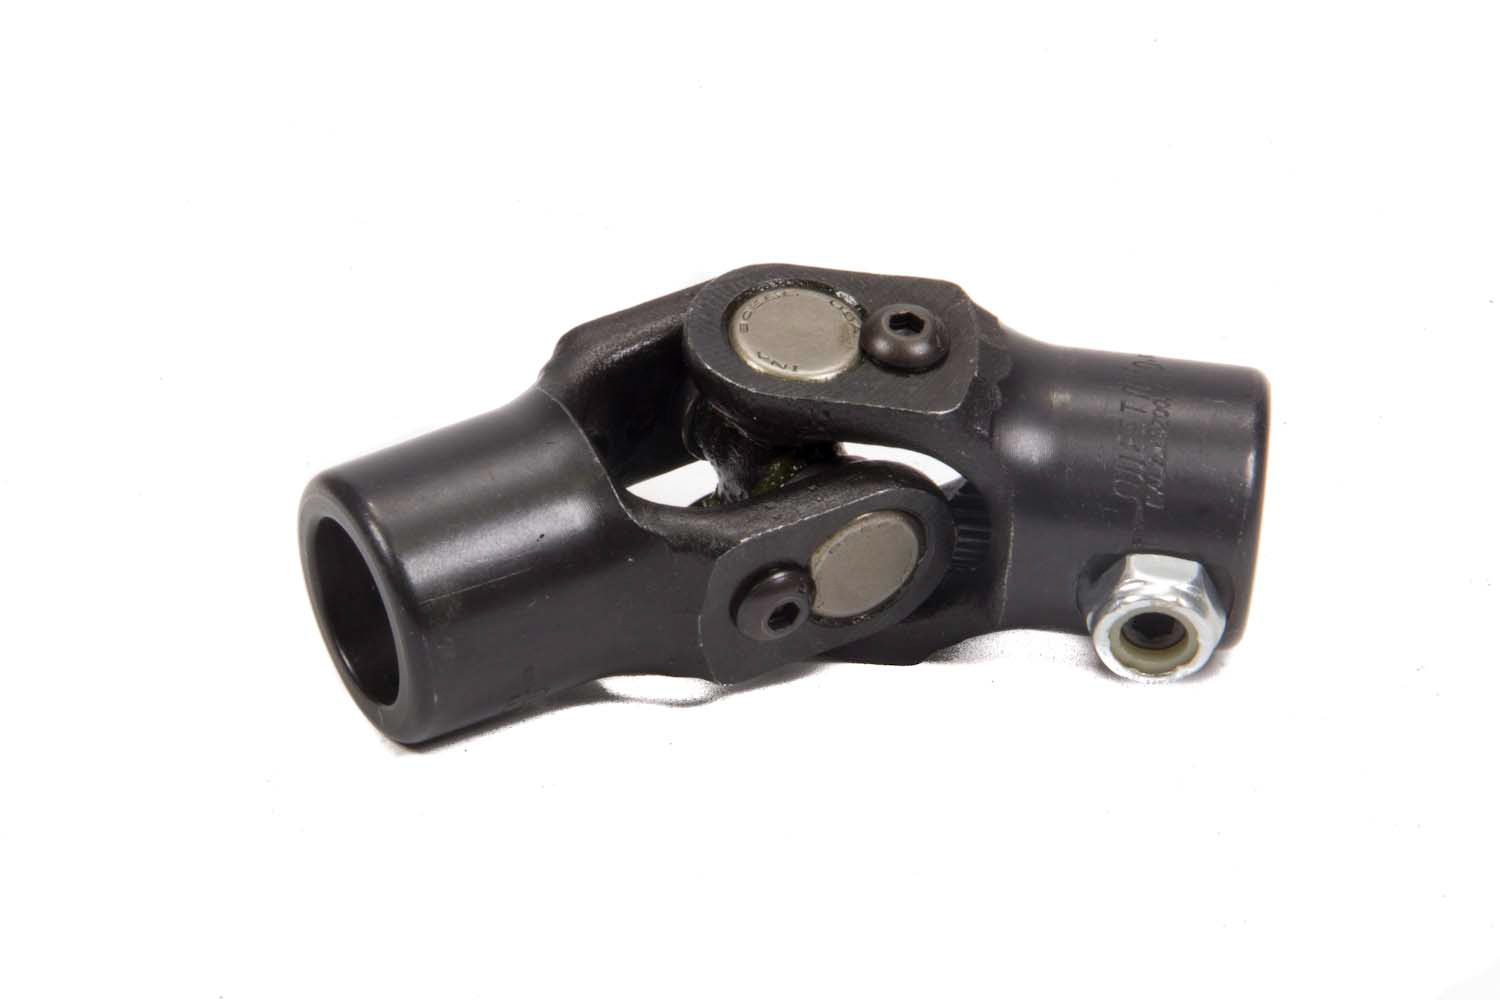 Sweet Manufacturing 401-51919 Steering Universal Joint, Single Joint, 3/4 in Double D to 3/4 in Double D, Steel, Black Paint, Each